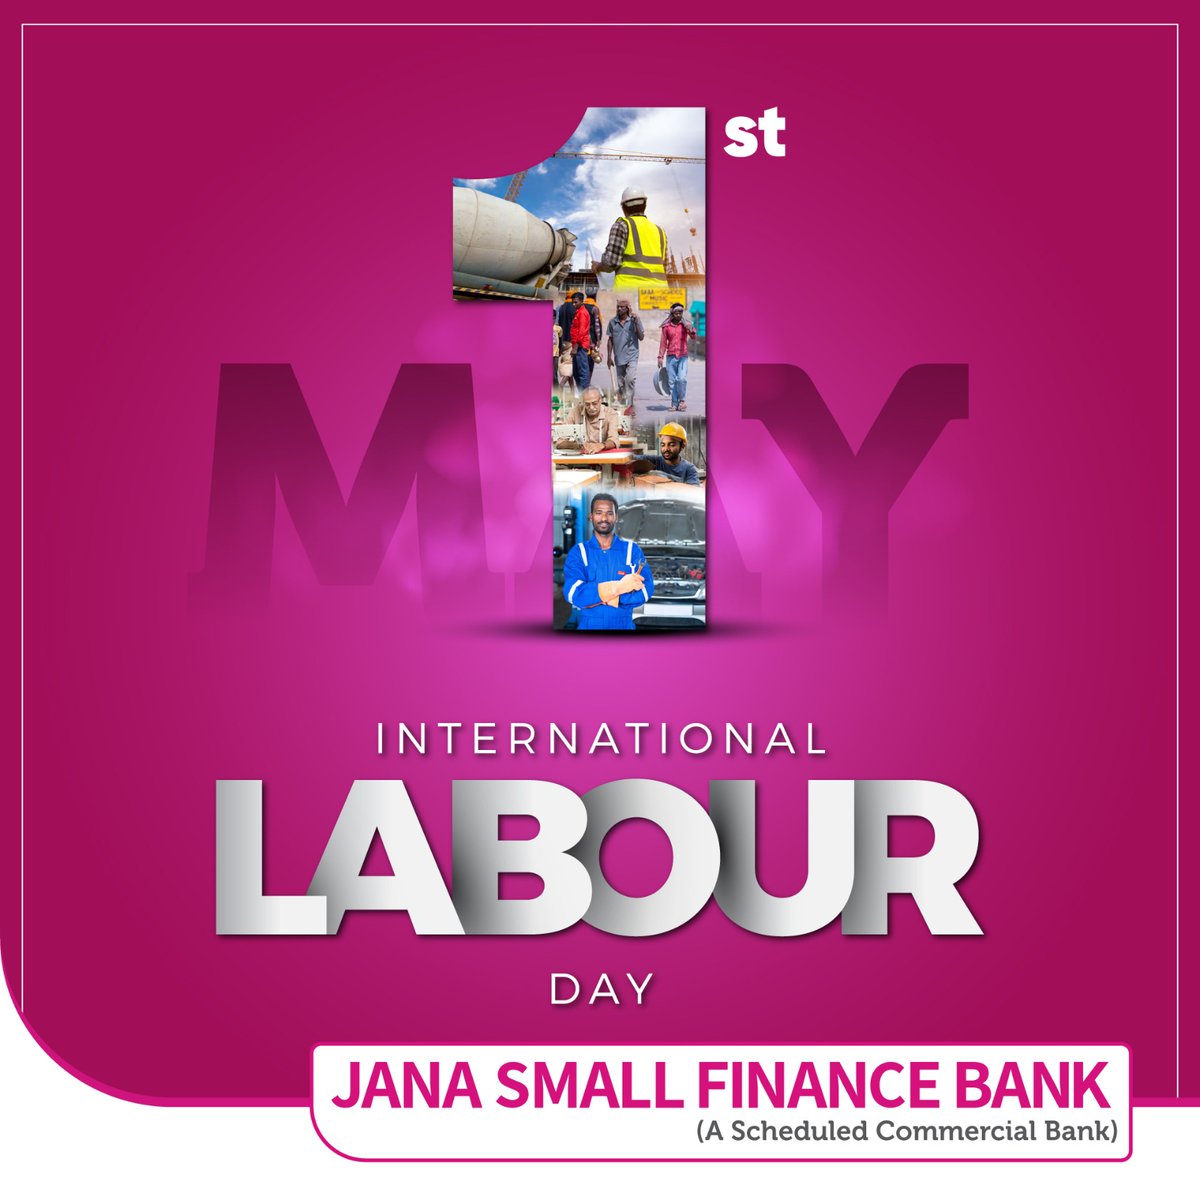 On this Labour Day, let's take a moment to appreciate the tireless efforts of workers around the globe. Your dedication fuels progress and builds nations. #LabourDay #janabank #LaborDay2024 #MayDay2024